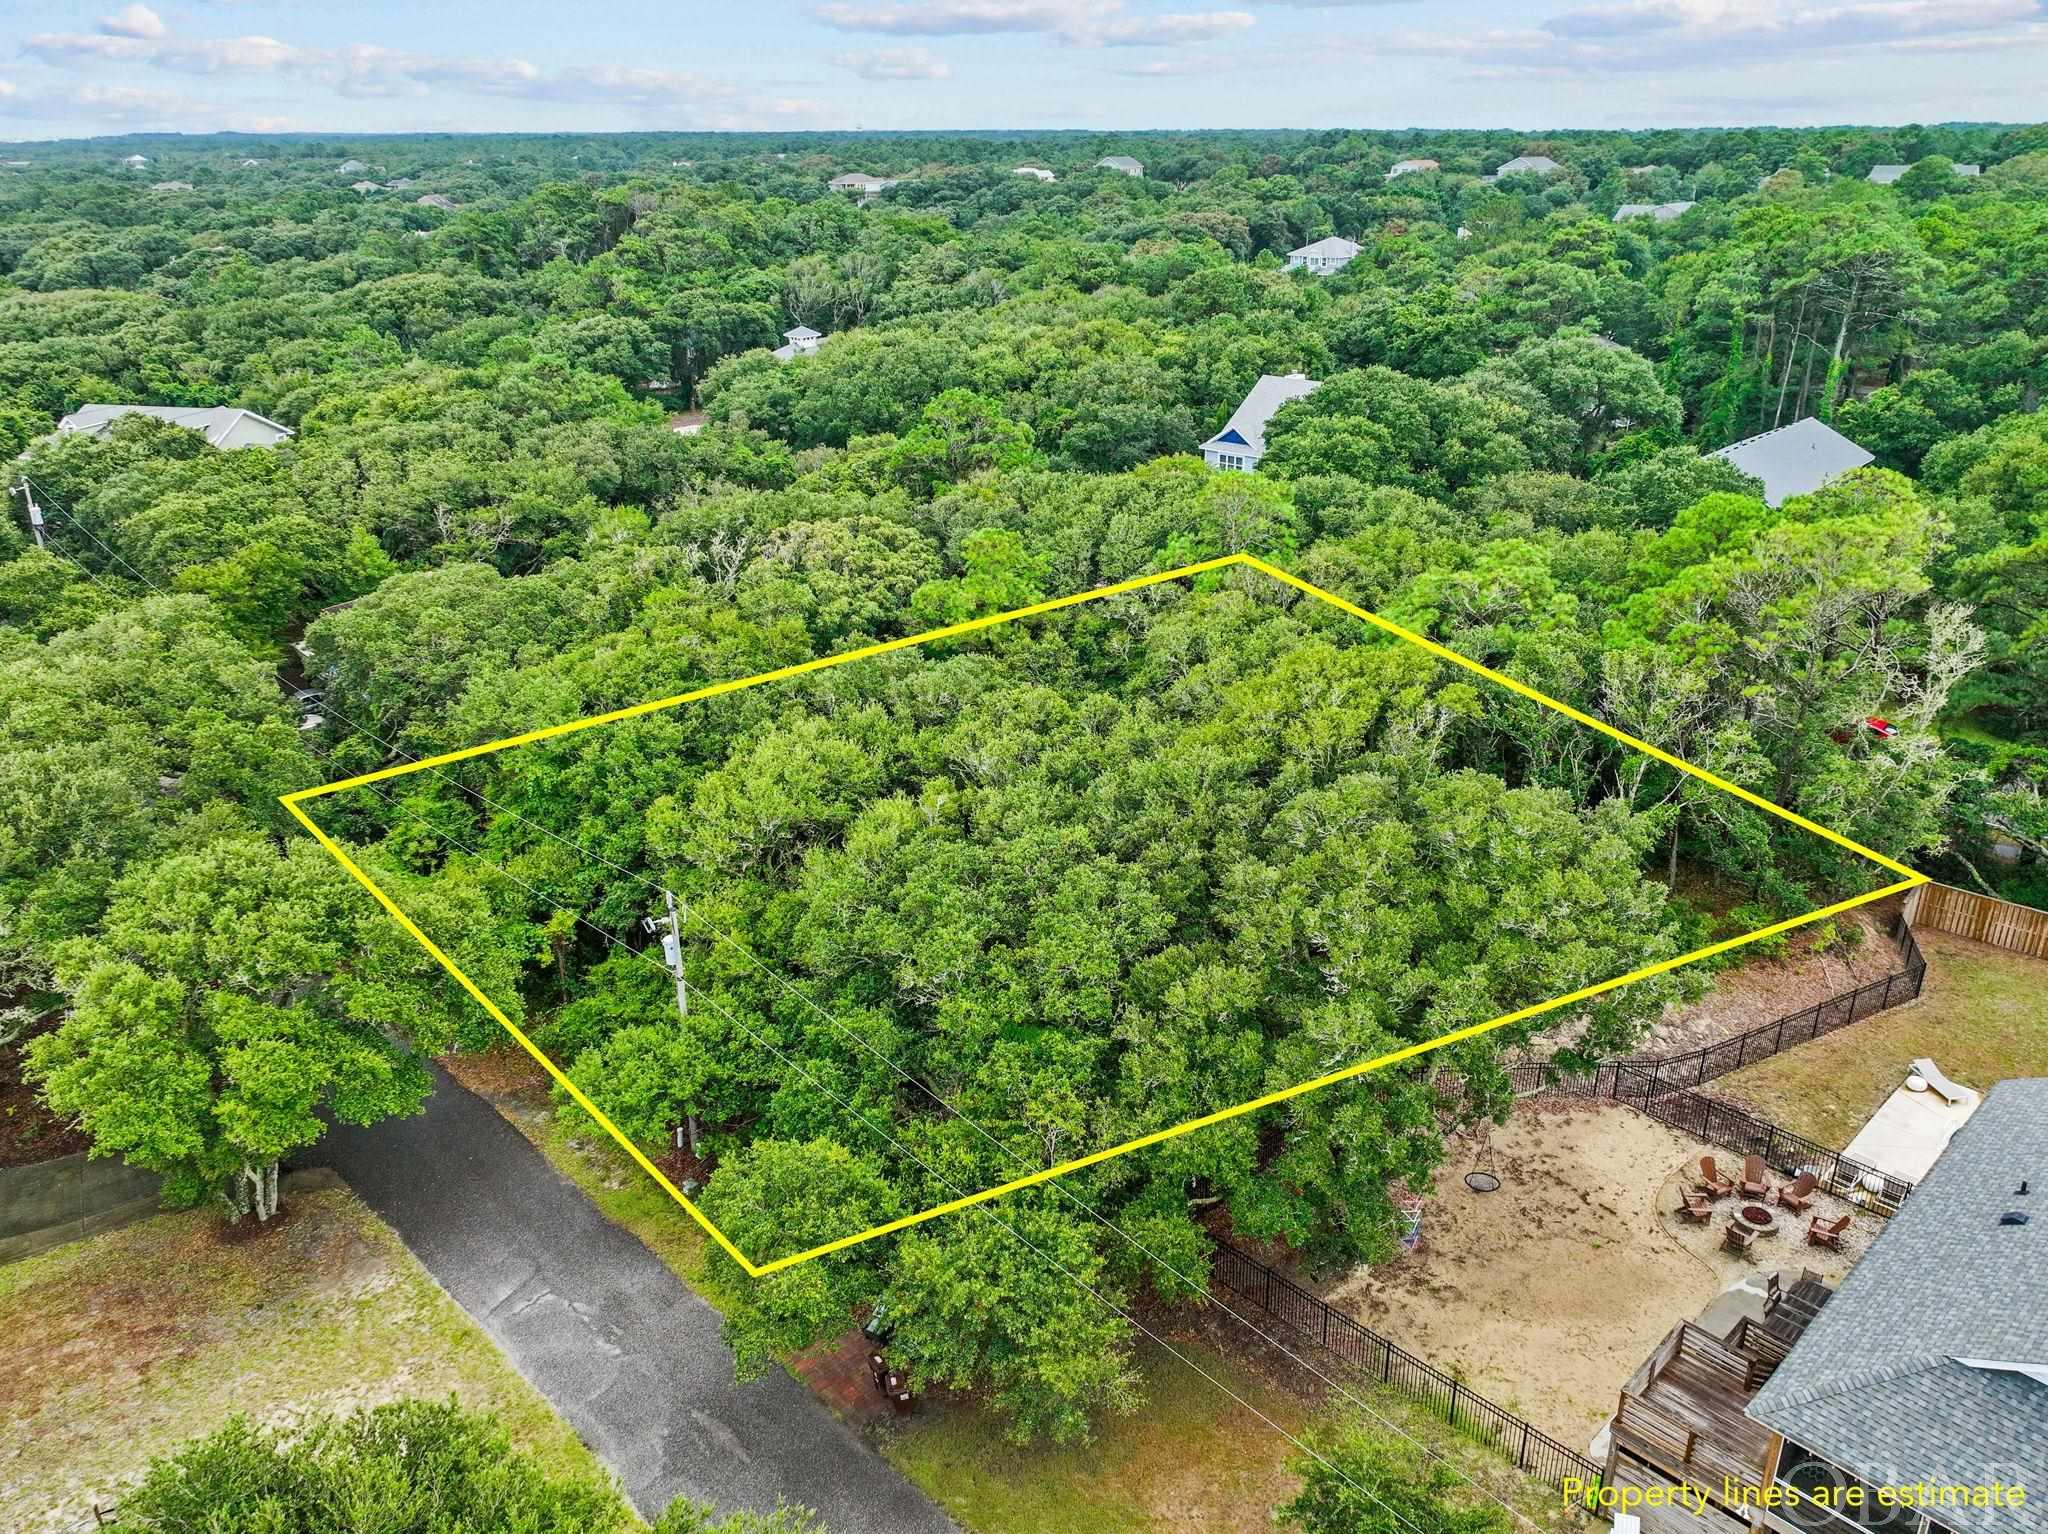 This Oceanside Lot is situated in the sought-after Southern Shores area, boasting a desirable location close to the Hickory Trail. This convenient positioning allows for easy connectivity to the main thoroughfare Duck Rd. Moreover, the lot is just a short walk away to the beach access via a picturesque tree-lined walking trail at the end of Circle Dr. The lot is perfectly suited for creating your custom dream home or a charming beach getaway. Notably, it is situated in an X flood zone, which means that you won't have to worry about costly flood insurance expenses. This makes it an attractive choice for potential homeowners. Additionally, this property presents a promising opportunity for those interested in an investment rental property, given its location and desirable features. There is an optional membership available to the Southern Shores Civic Association (SSCA). This membership offers various perks, including access to a marina, a serene sound-side beach area, parks, and other amenities. This adds further appeal to the property, enhancing its value and potential for a well-rounded coastal lifestyle. This lot is truly a rare find in the Southern Shores community, as it's one of the few available parcels in this sought-after area. With its prime location, proximity to the beach, and potential for building your dream home or investment property, it presents an exceptional opportunity for those looking to make the most of coastal living in a highly desirable neighborhood.